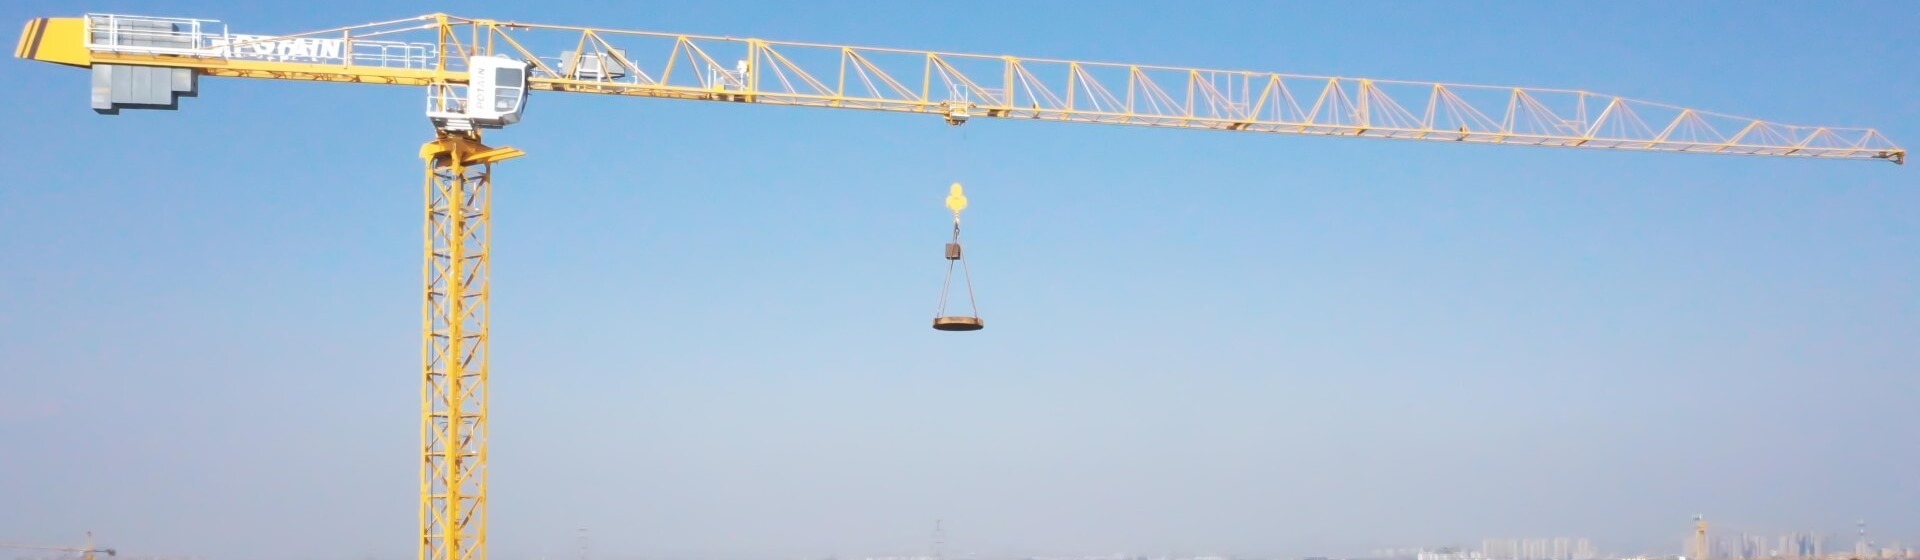 Manitowoc-adds-Potain-MCT-135-to-growing-topless-tower-crane-lineup-in-Asia-range-01.jpg